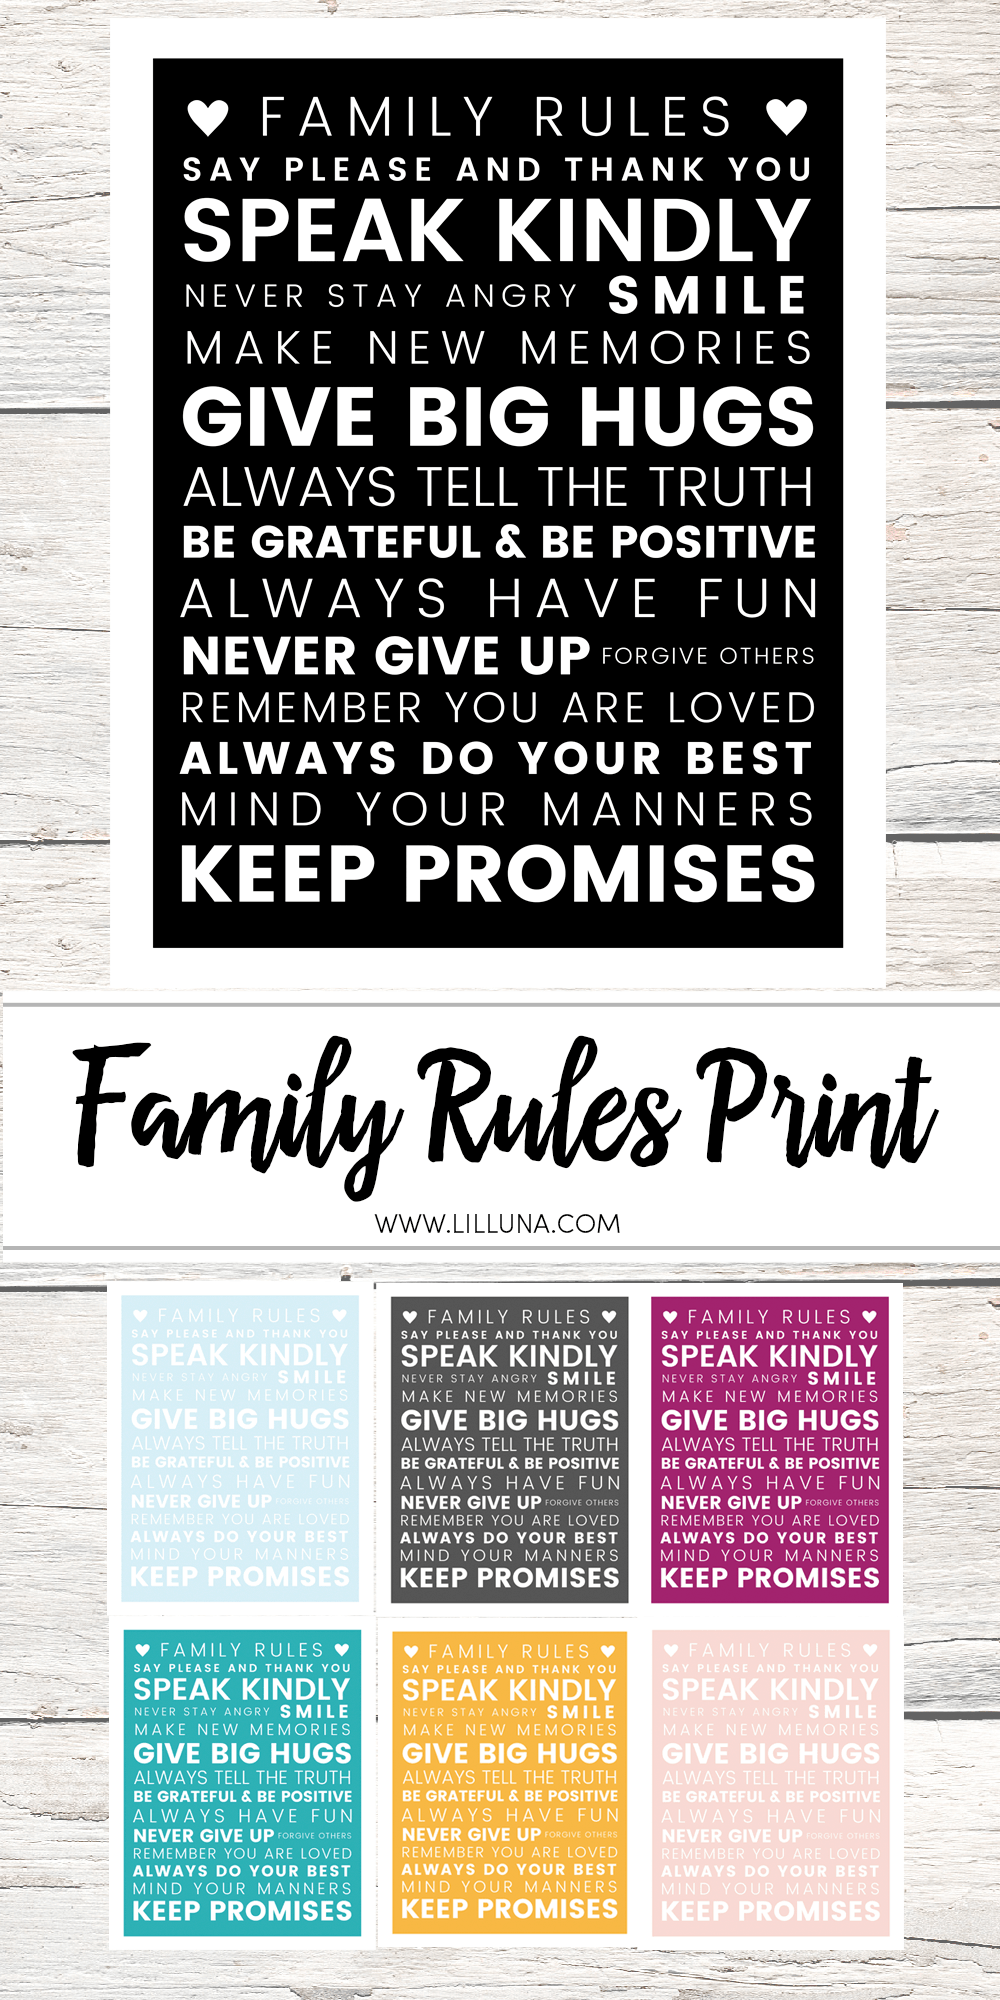 FREE Family Rules Print to download and display in your own home. Also chatting about why HUGS are so important! @Huggies #NoBabyUnhugged #HuggiesCouncil #ad